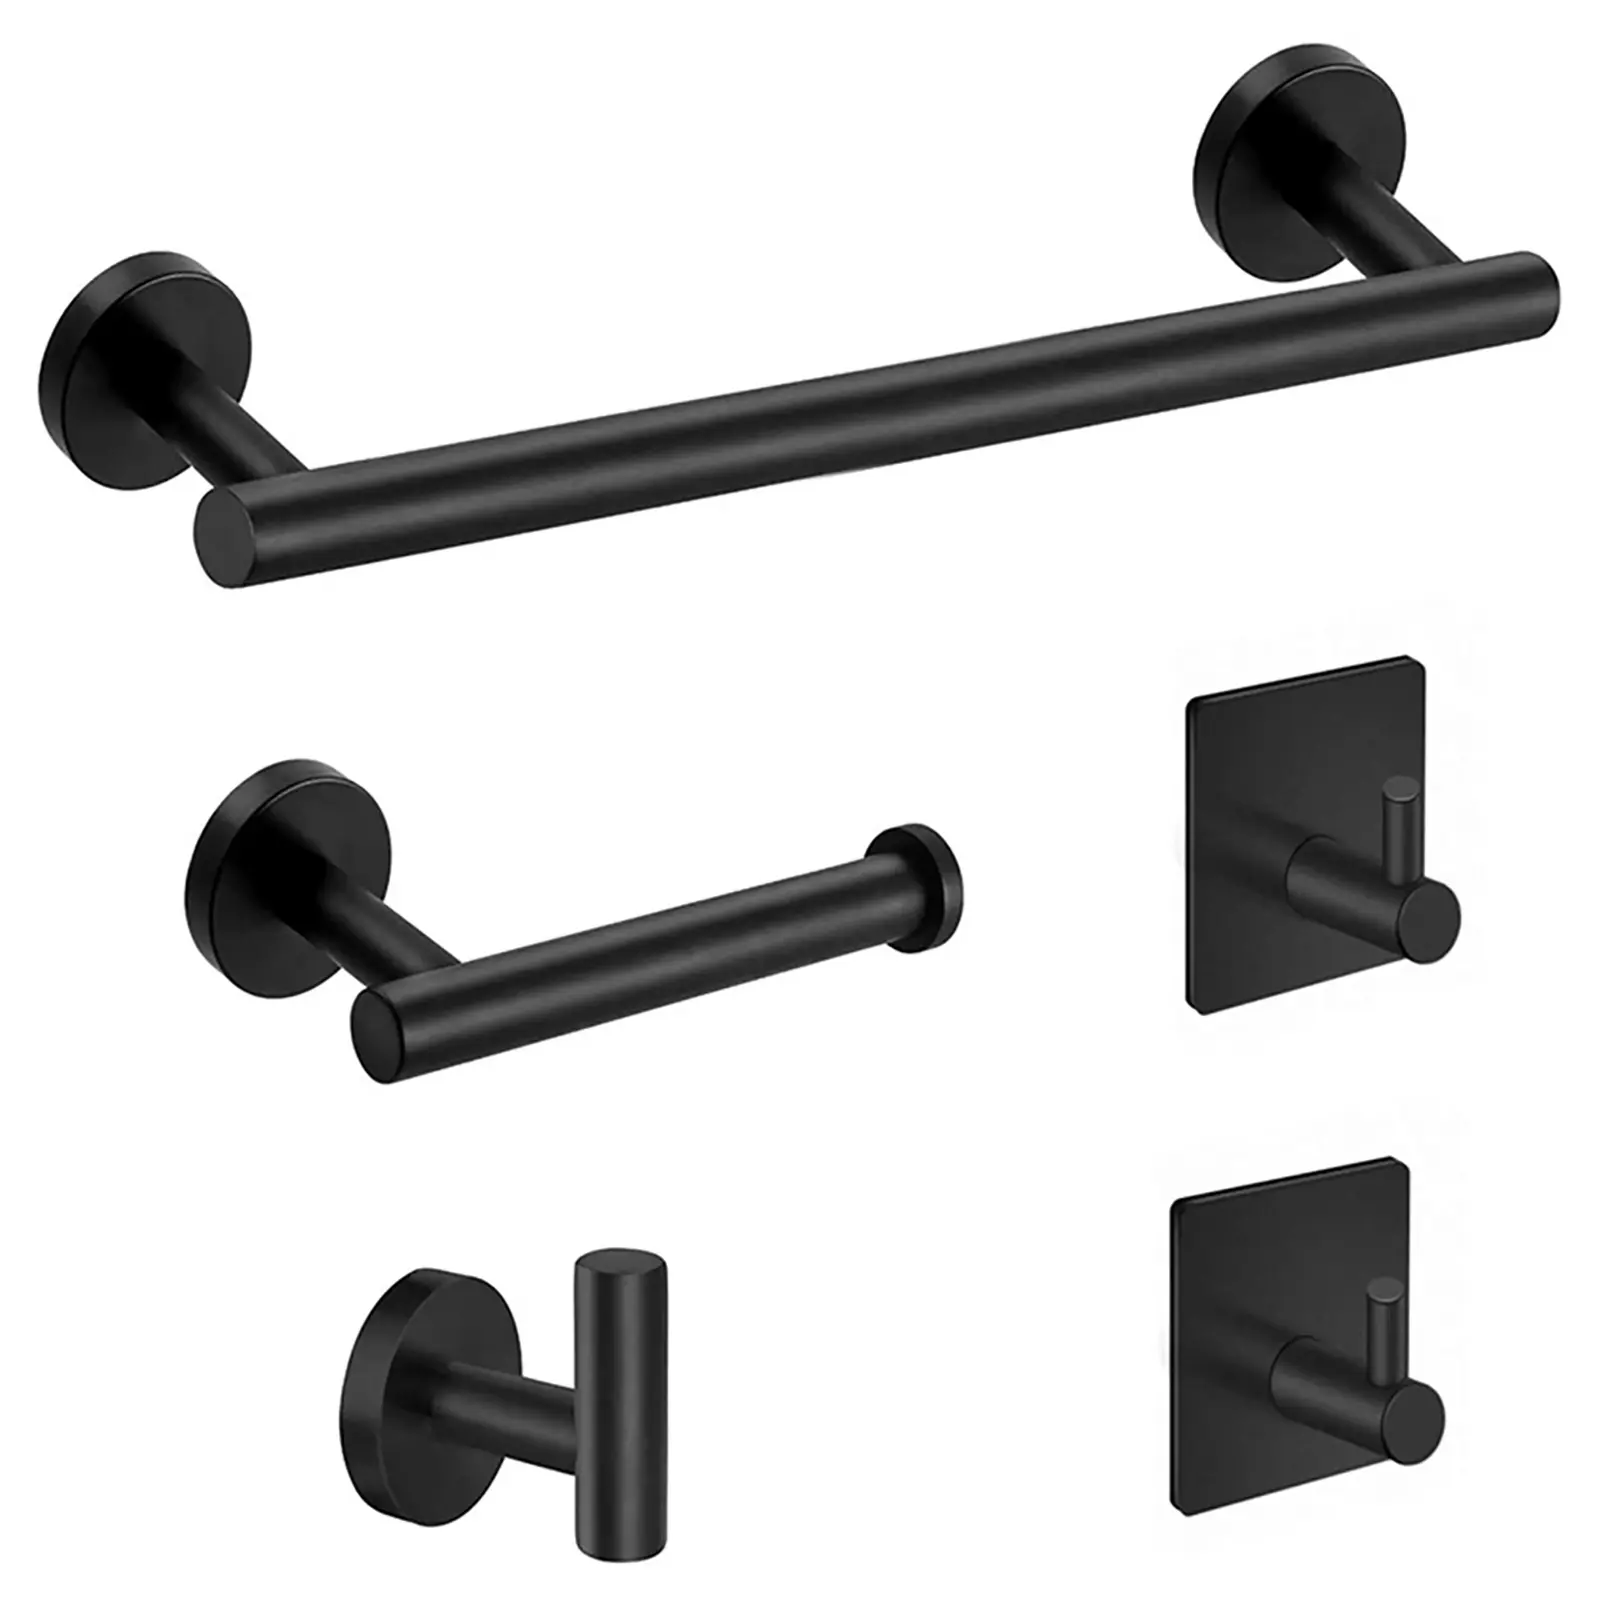 304 Stainless steel 5 piece set wall-mounted paper holder towel bar rack coat clothes hooks bathroom accessories set